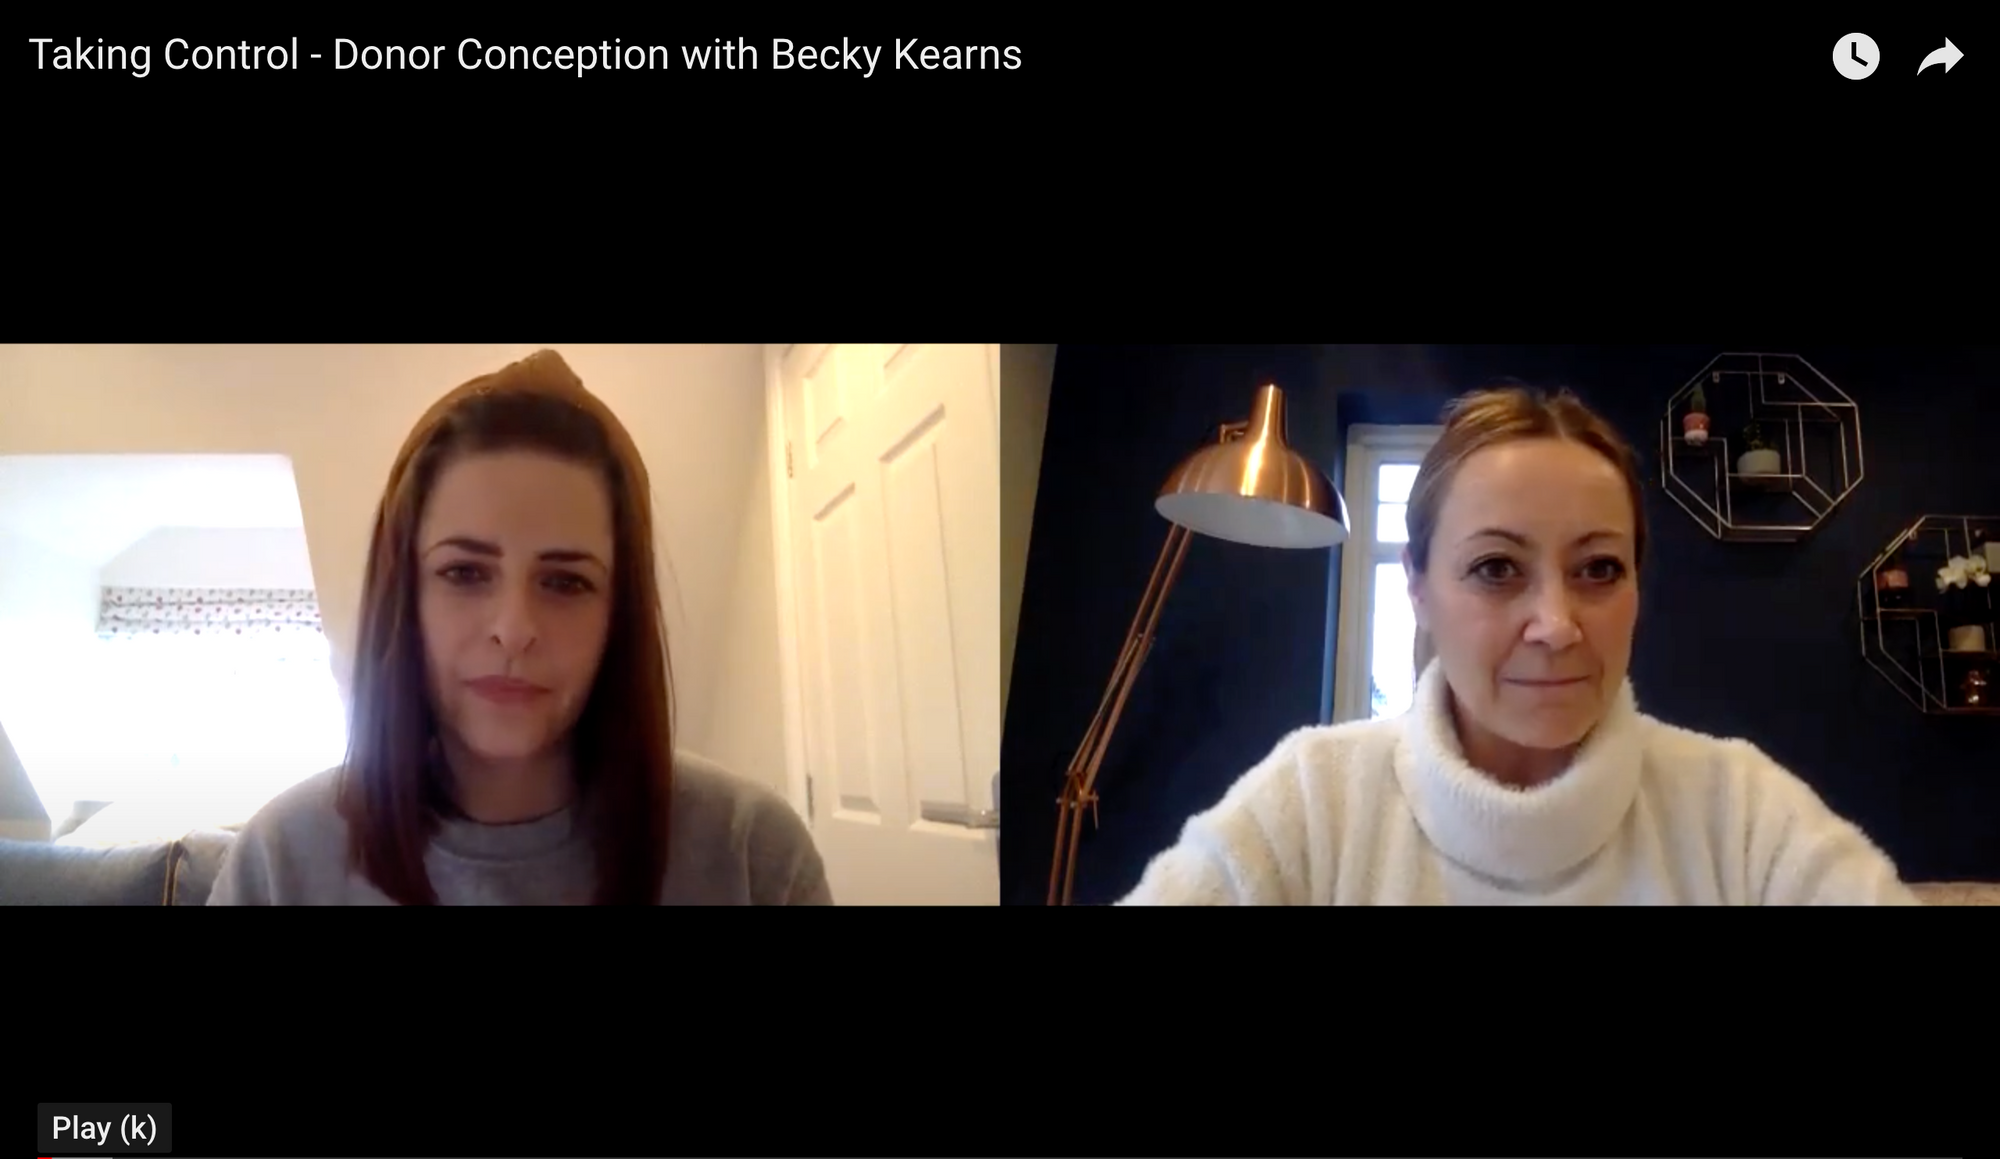 TAKING CONTROL SERIES - Interview with Becky Kearns on Donor Conception